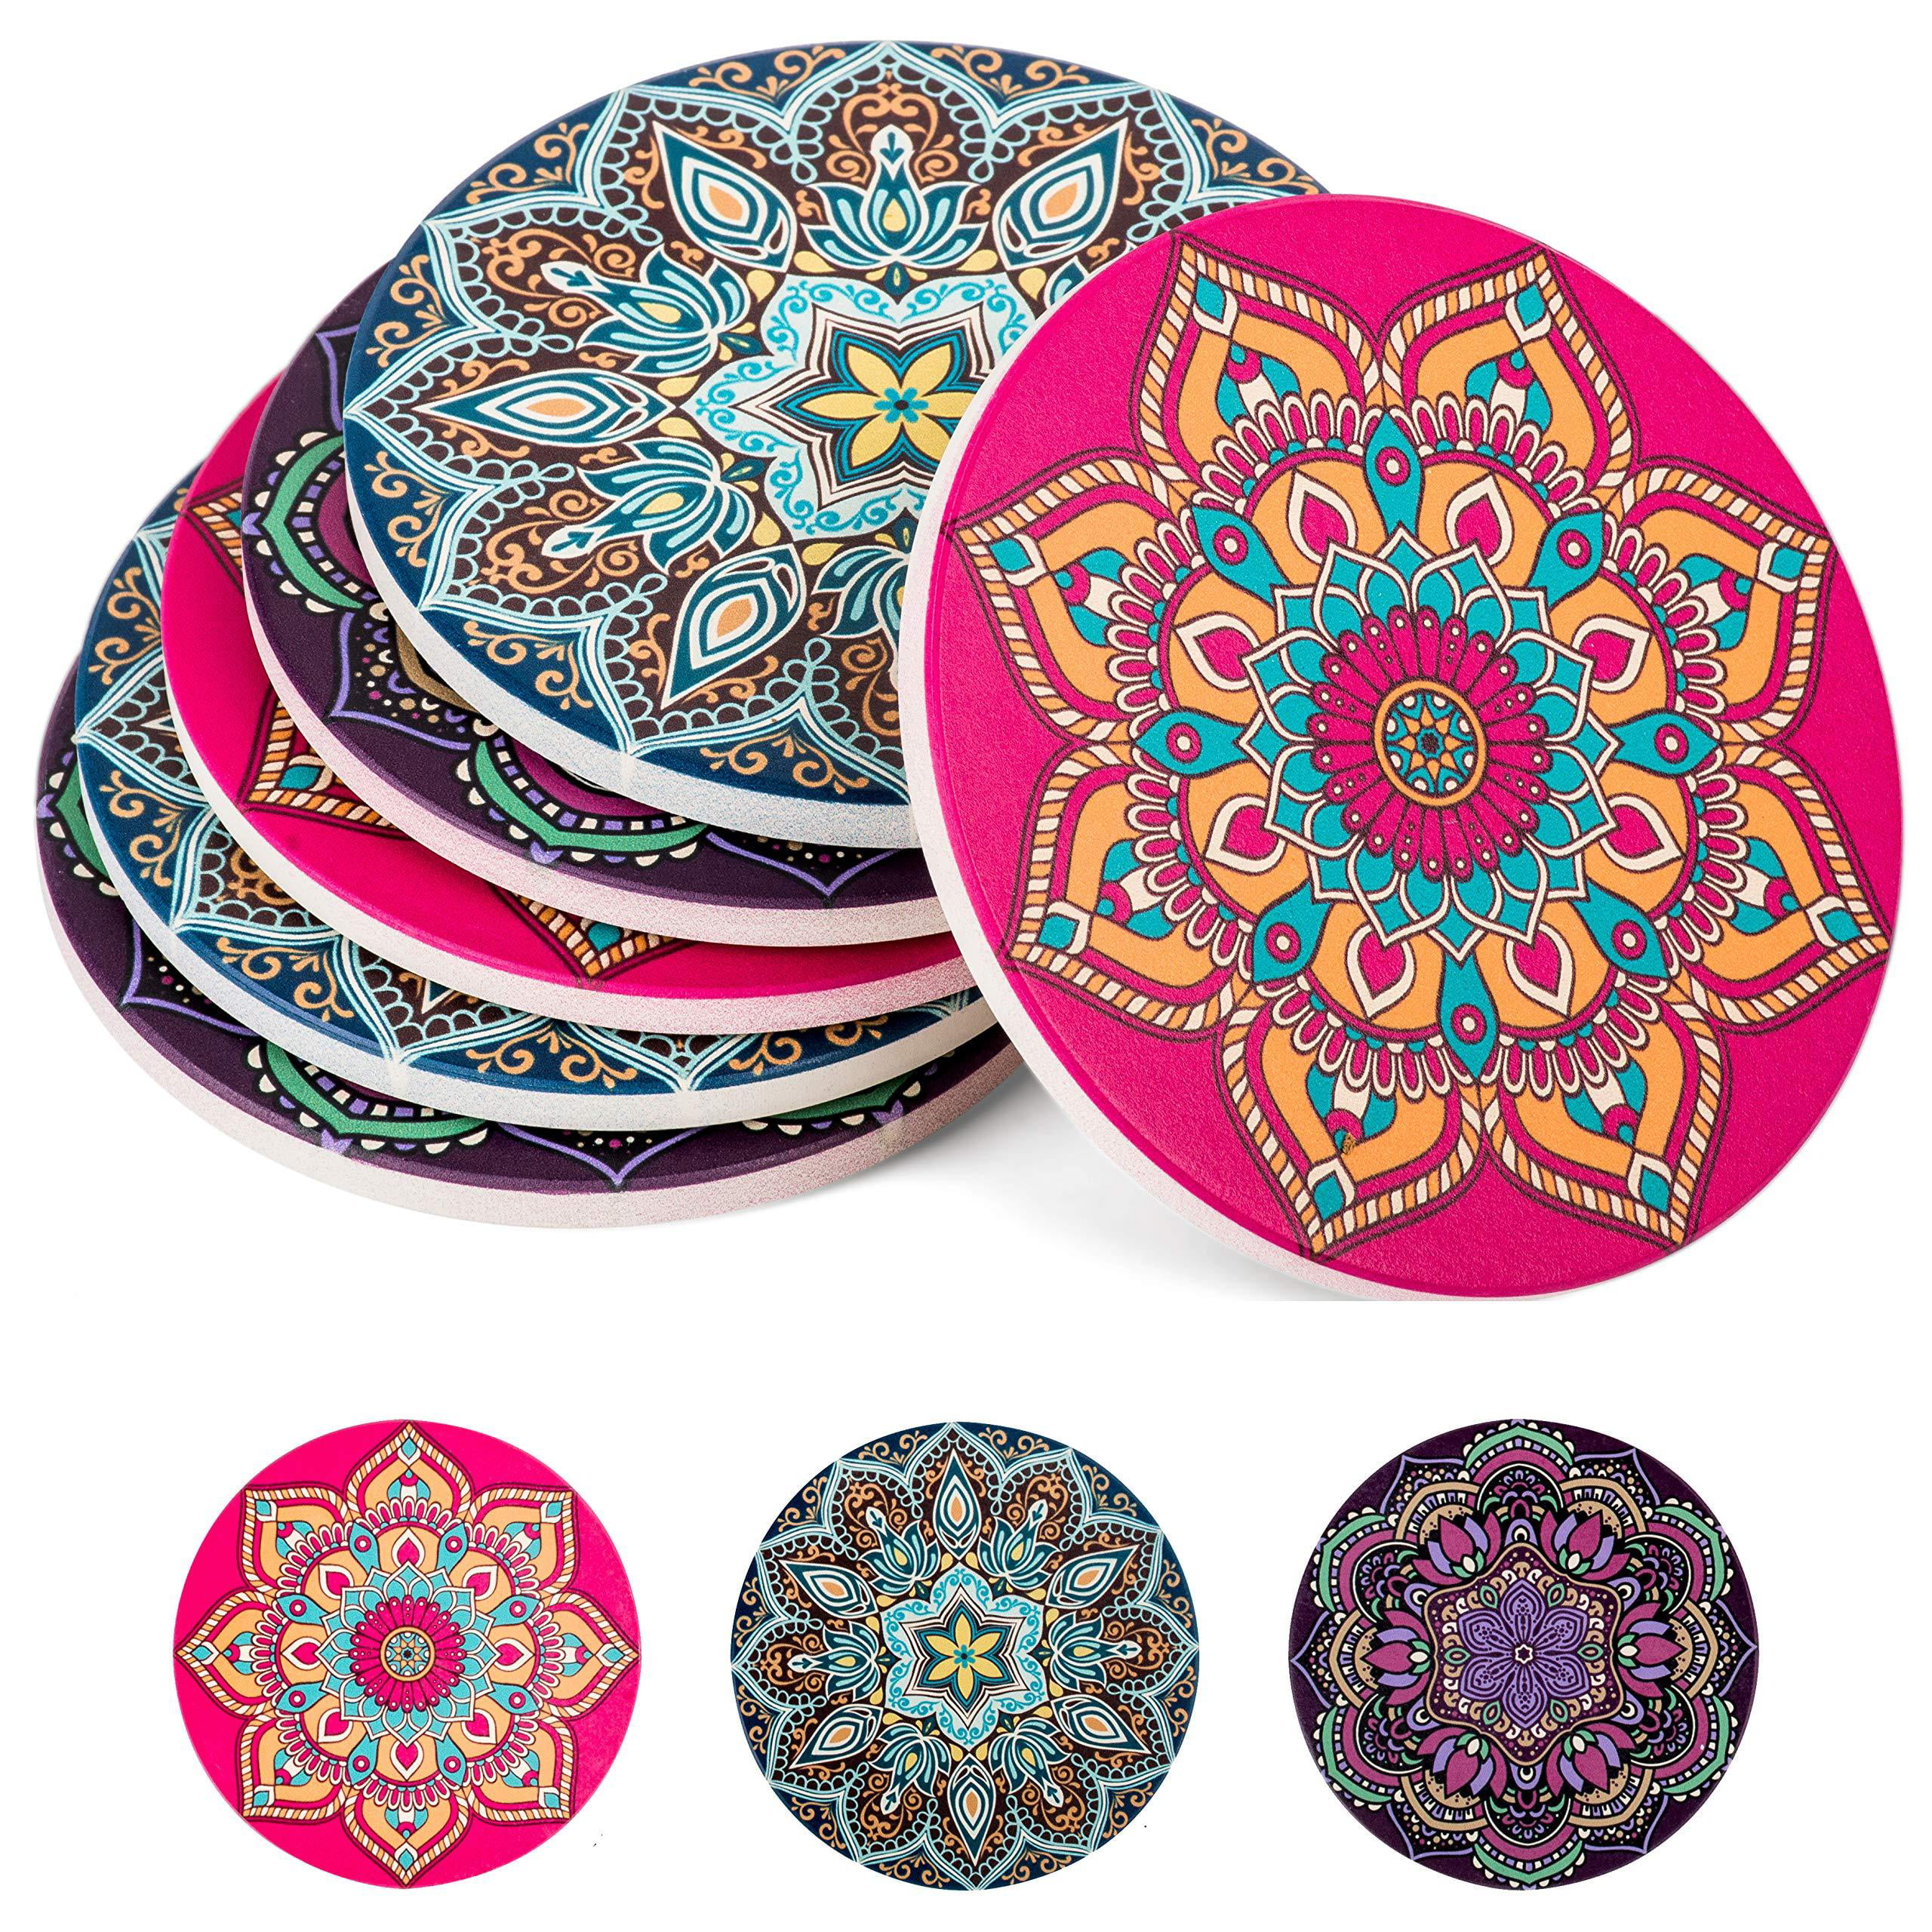 6 Pcs/Set Round Drink Coaster With Holder Cup Mat Home Kitchen Bar Decor Supply